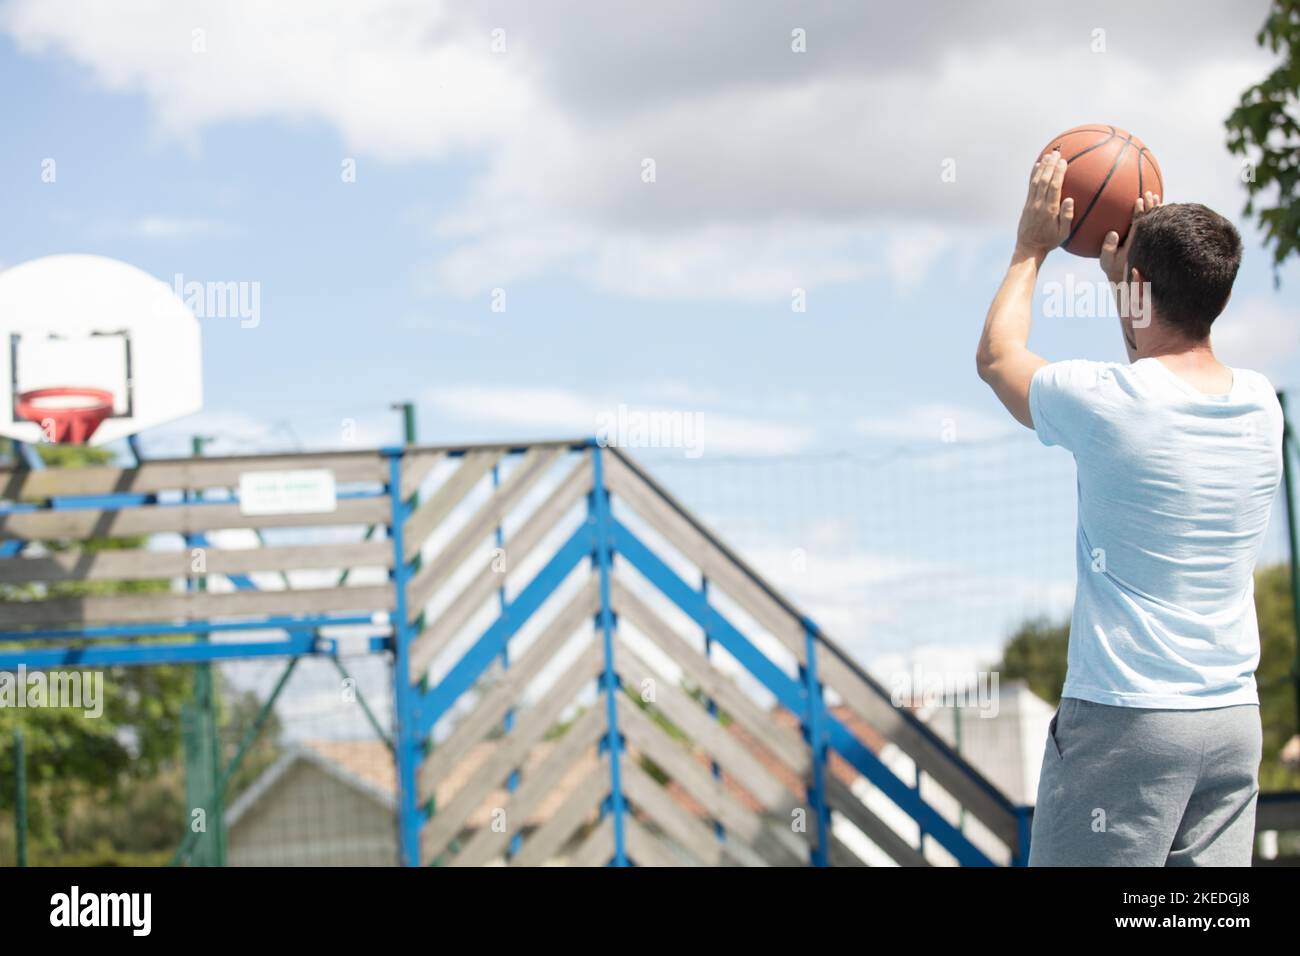 athletic male basketball player in action outdoors Stock Photo